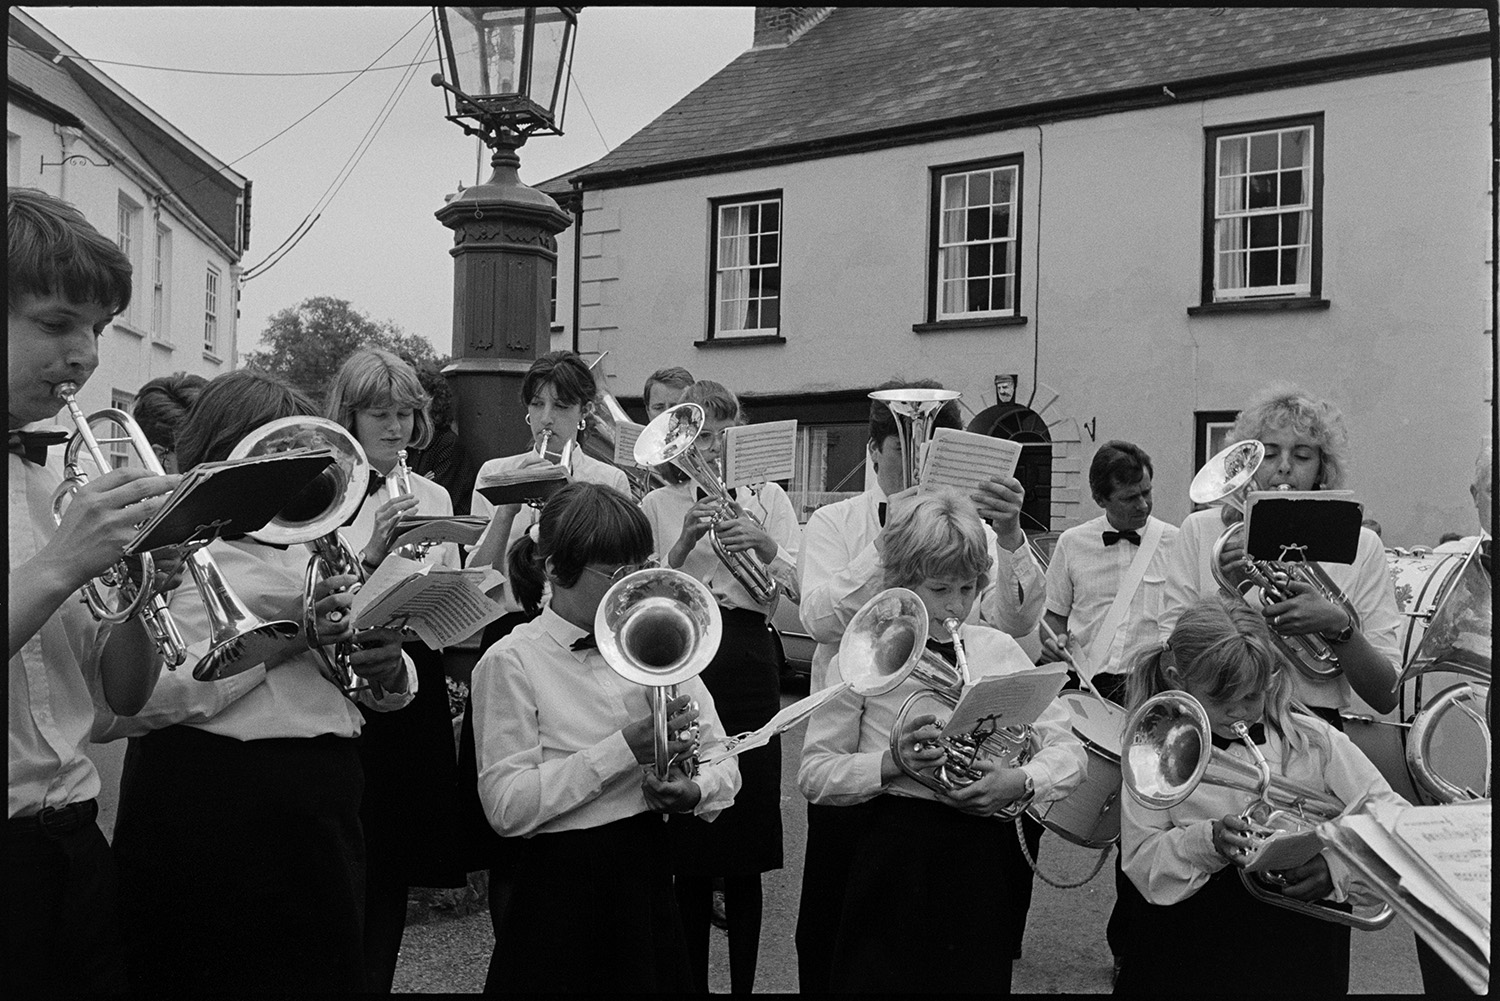 Brass band playing in village.
[South Molton Town Band playing in Fore Street, Chulmleigh at the junction with New Street. The are stood in front of a lamp.]